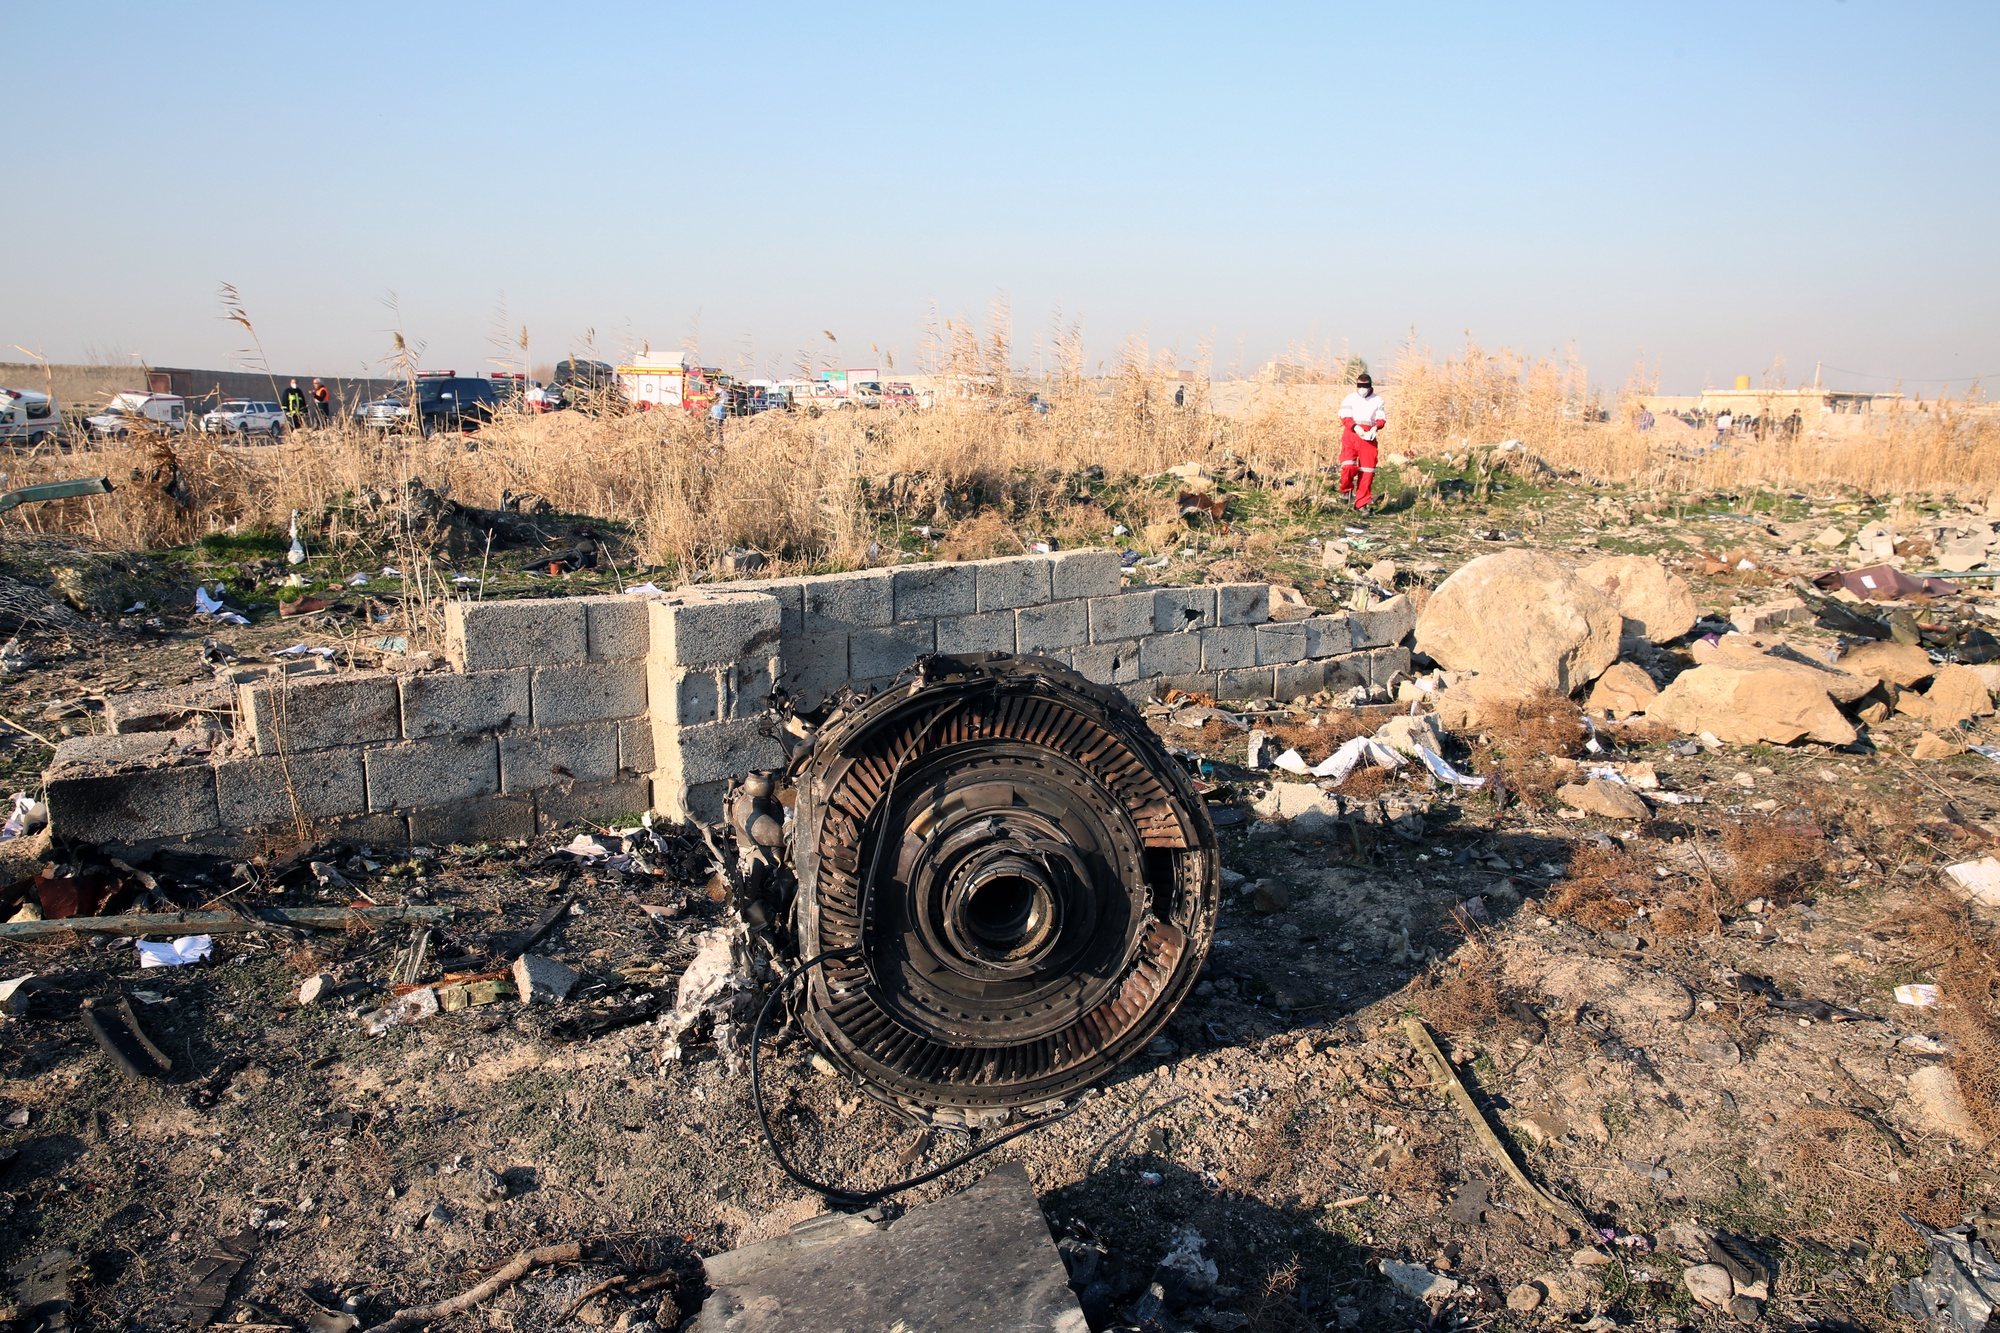 epa08922657 (FILE) - One of the engine of the plane lies among the wreckage after an Ukraine International Airlines Boeing 737-800 carrying 176 people crashed near Imam Khomeini Airport in Tehran, killing everyone on board, in Shahriar, Iran, 08 January 2020 (reissued 06 January 2021). A Ukrainian International Airlines passenger plane was downed by Iranian armed forces on 08 January 2020 near Tehran, killing all 176 people aboard, after allegedly mistaking it for an incoming missile.  EPA/ABEDIN TAHERKENAREH *** Local Caption *** 55751015